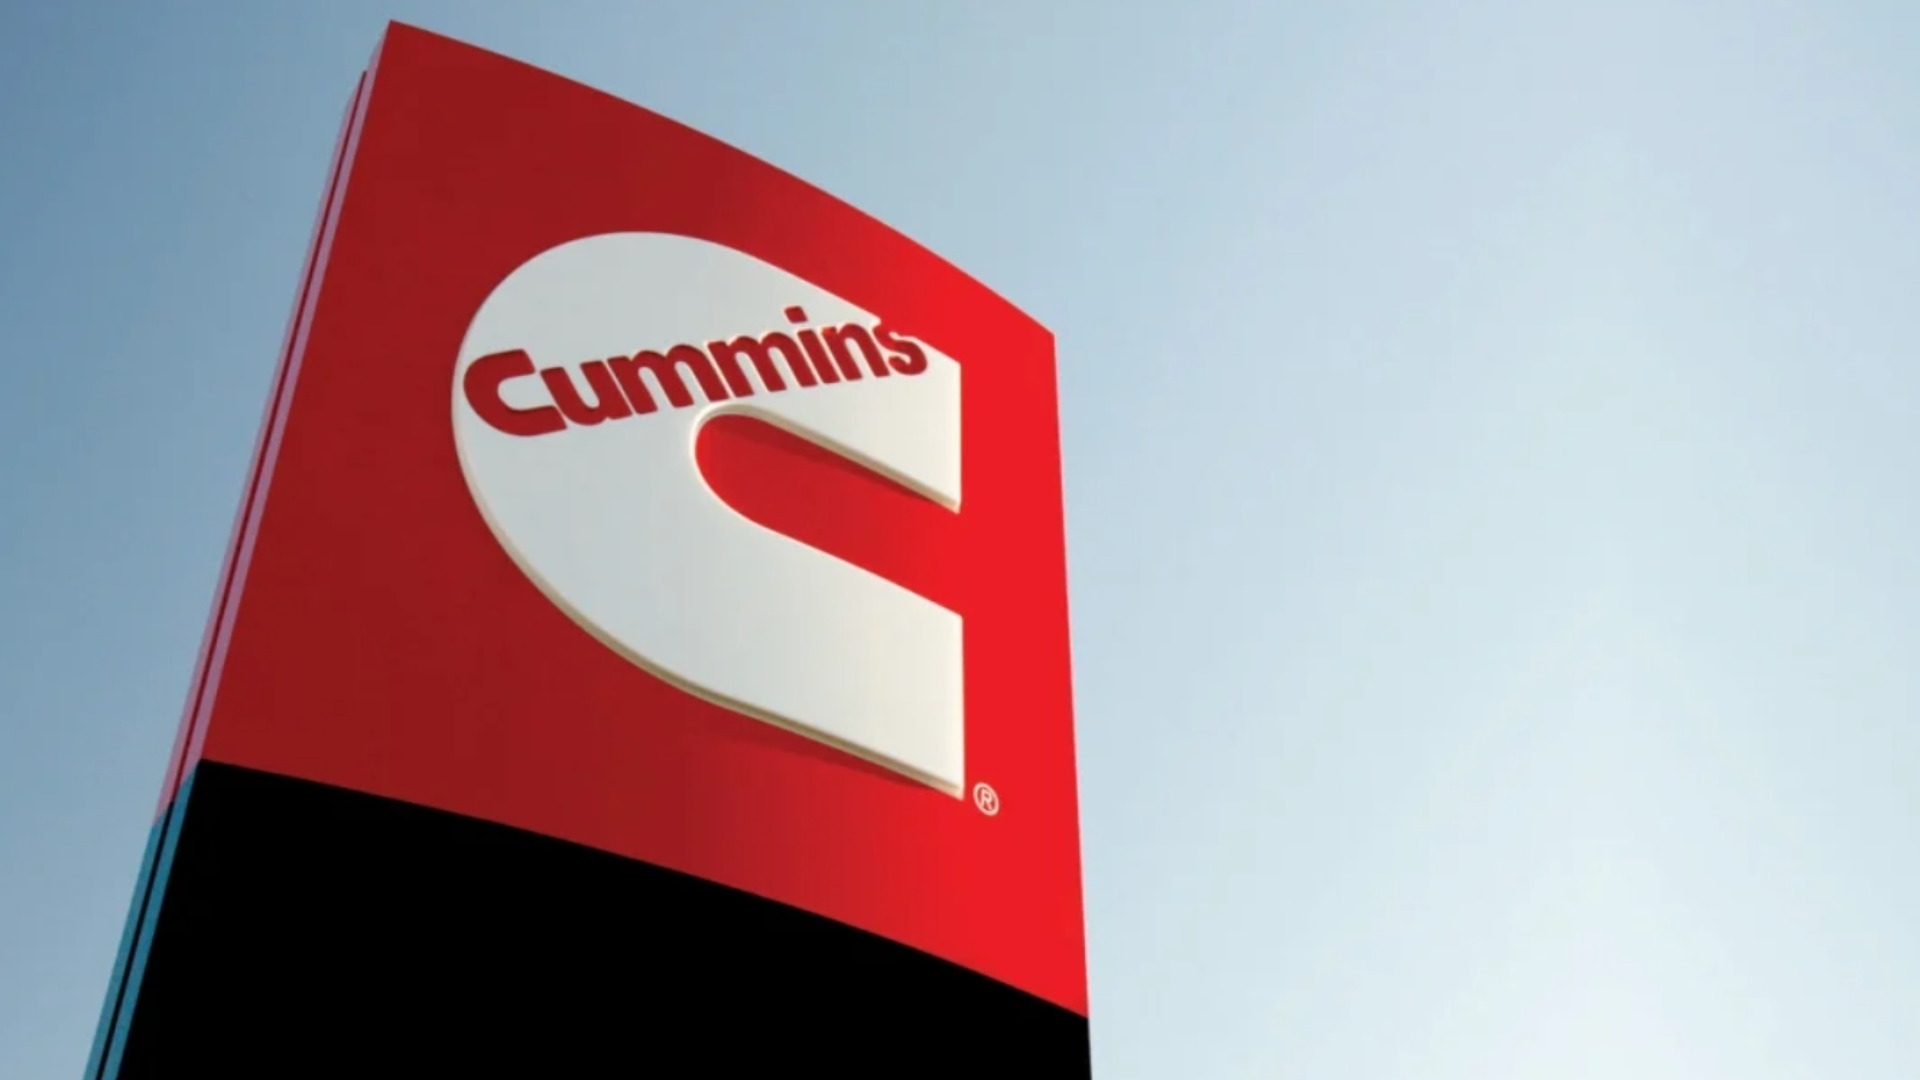 In a statement to 13 News, a Cummins spokeswoman says the company is "evolving its operating system" to help address 'Destination Zero'